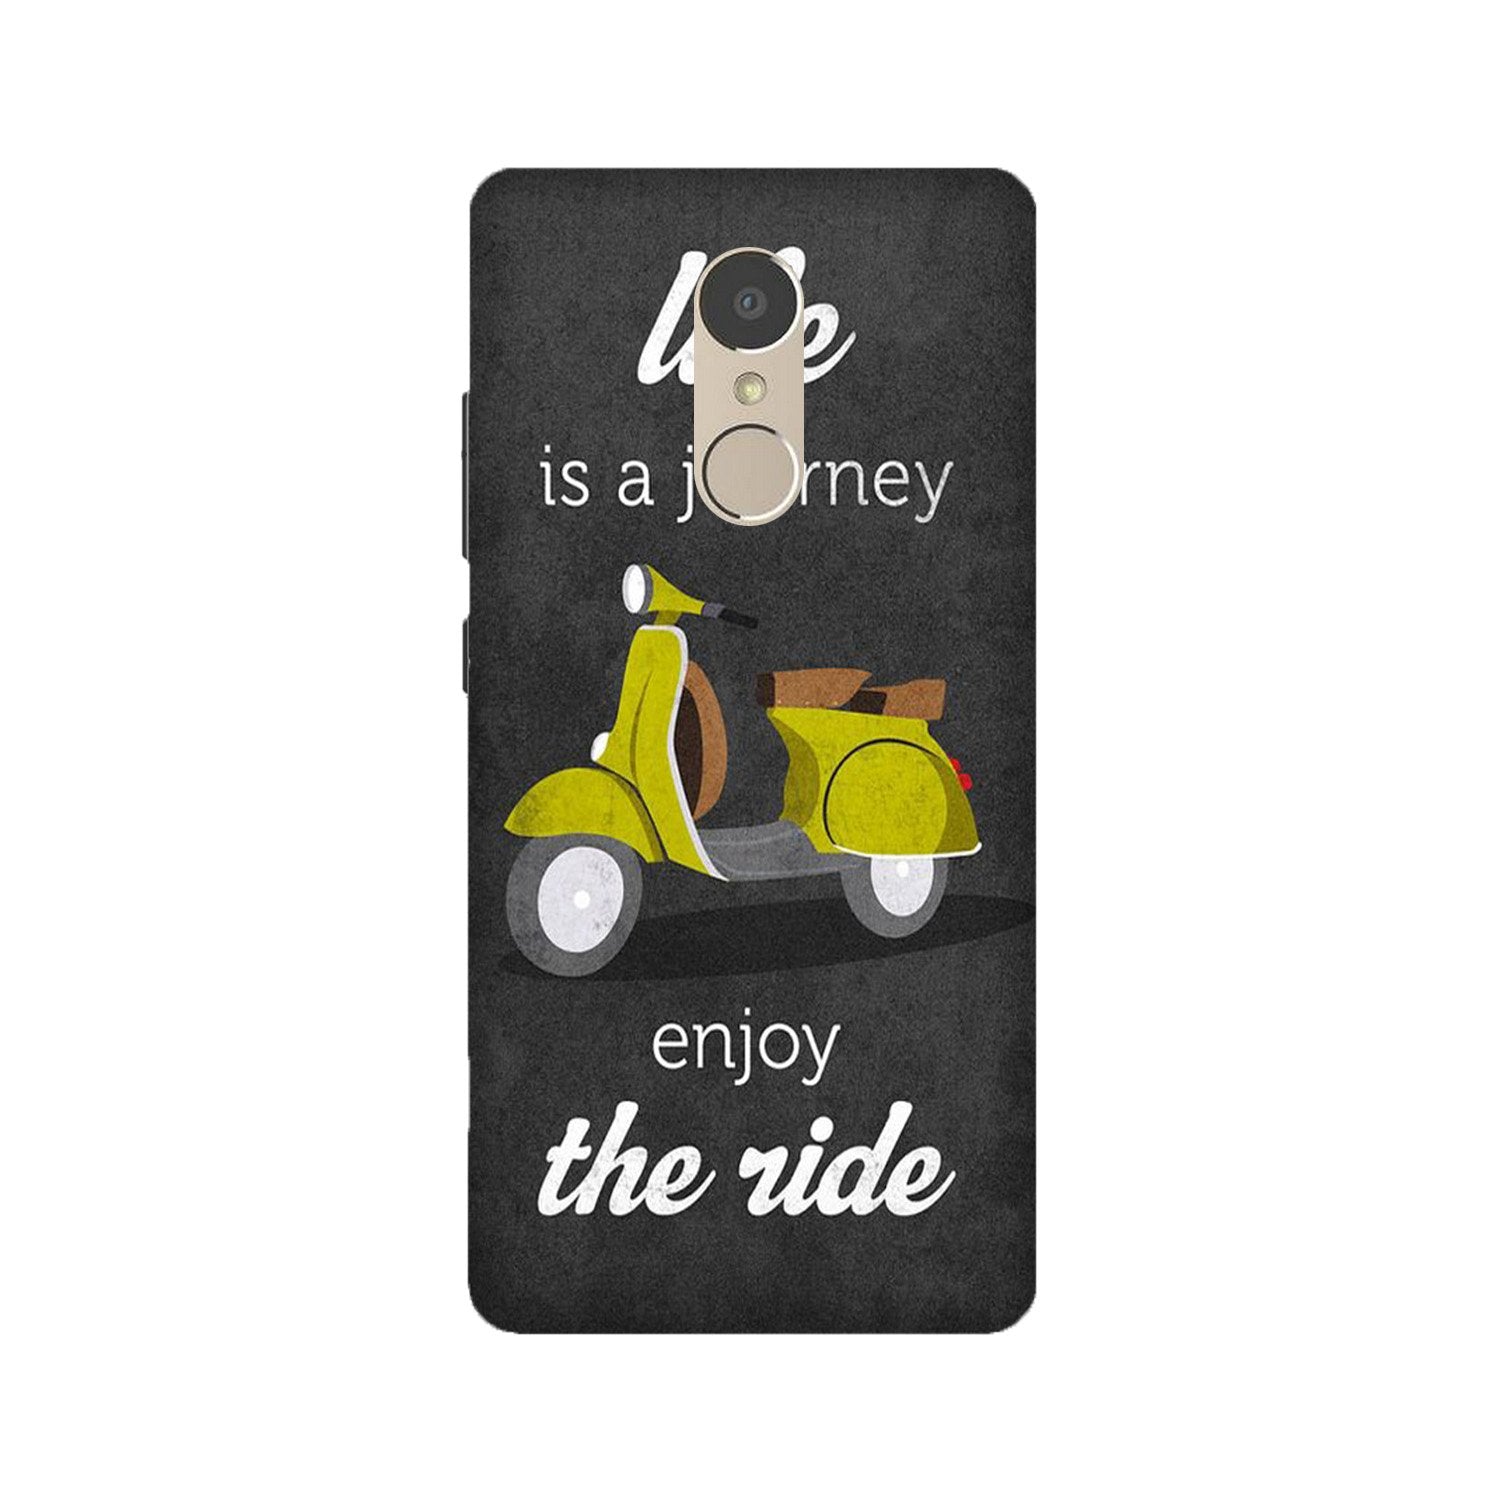 Life is a Journey Case for Lenovo K6 Note (Design No. 261)